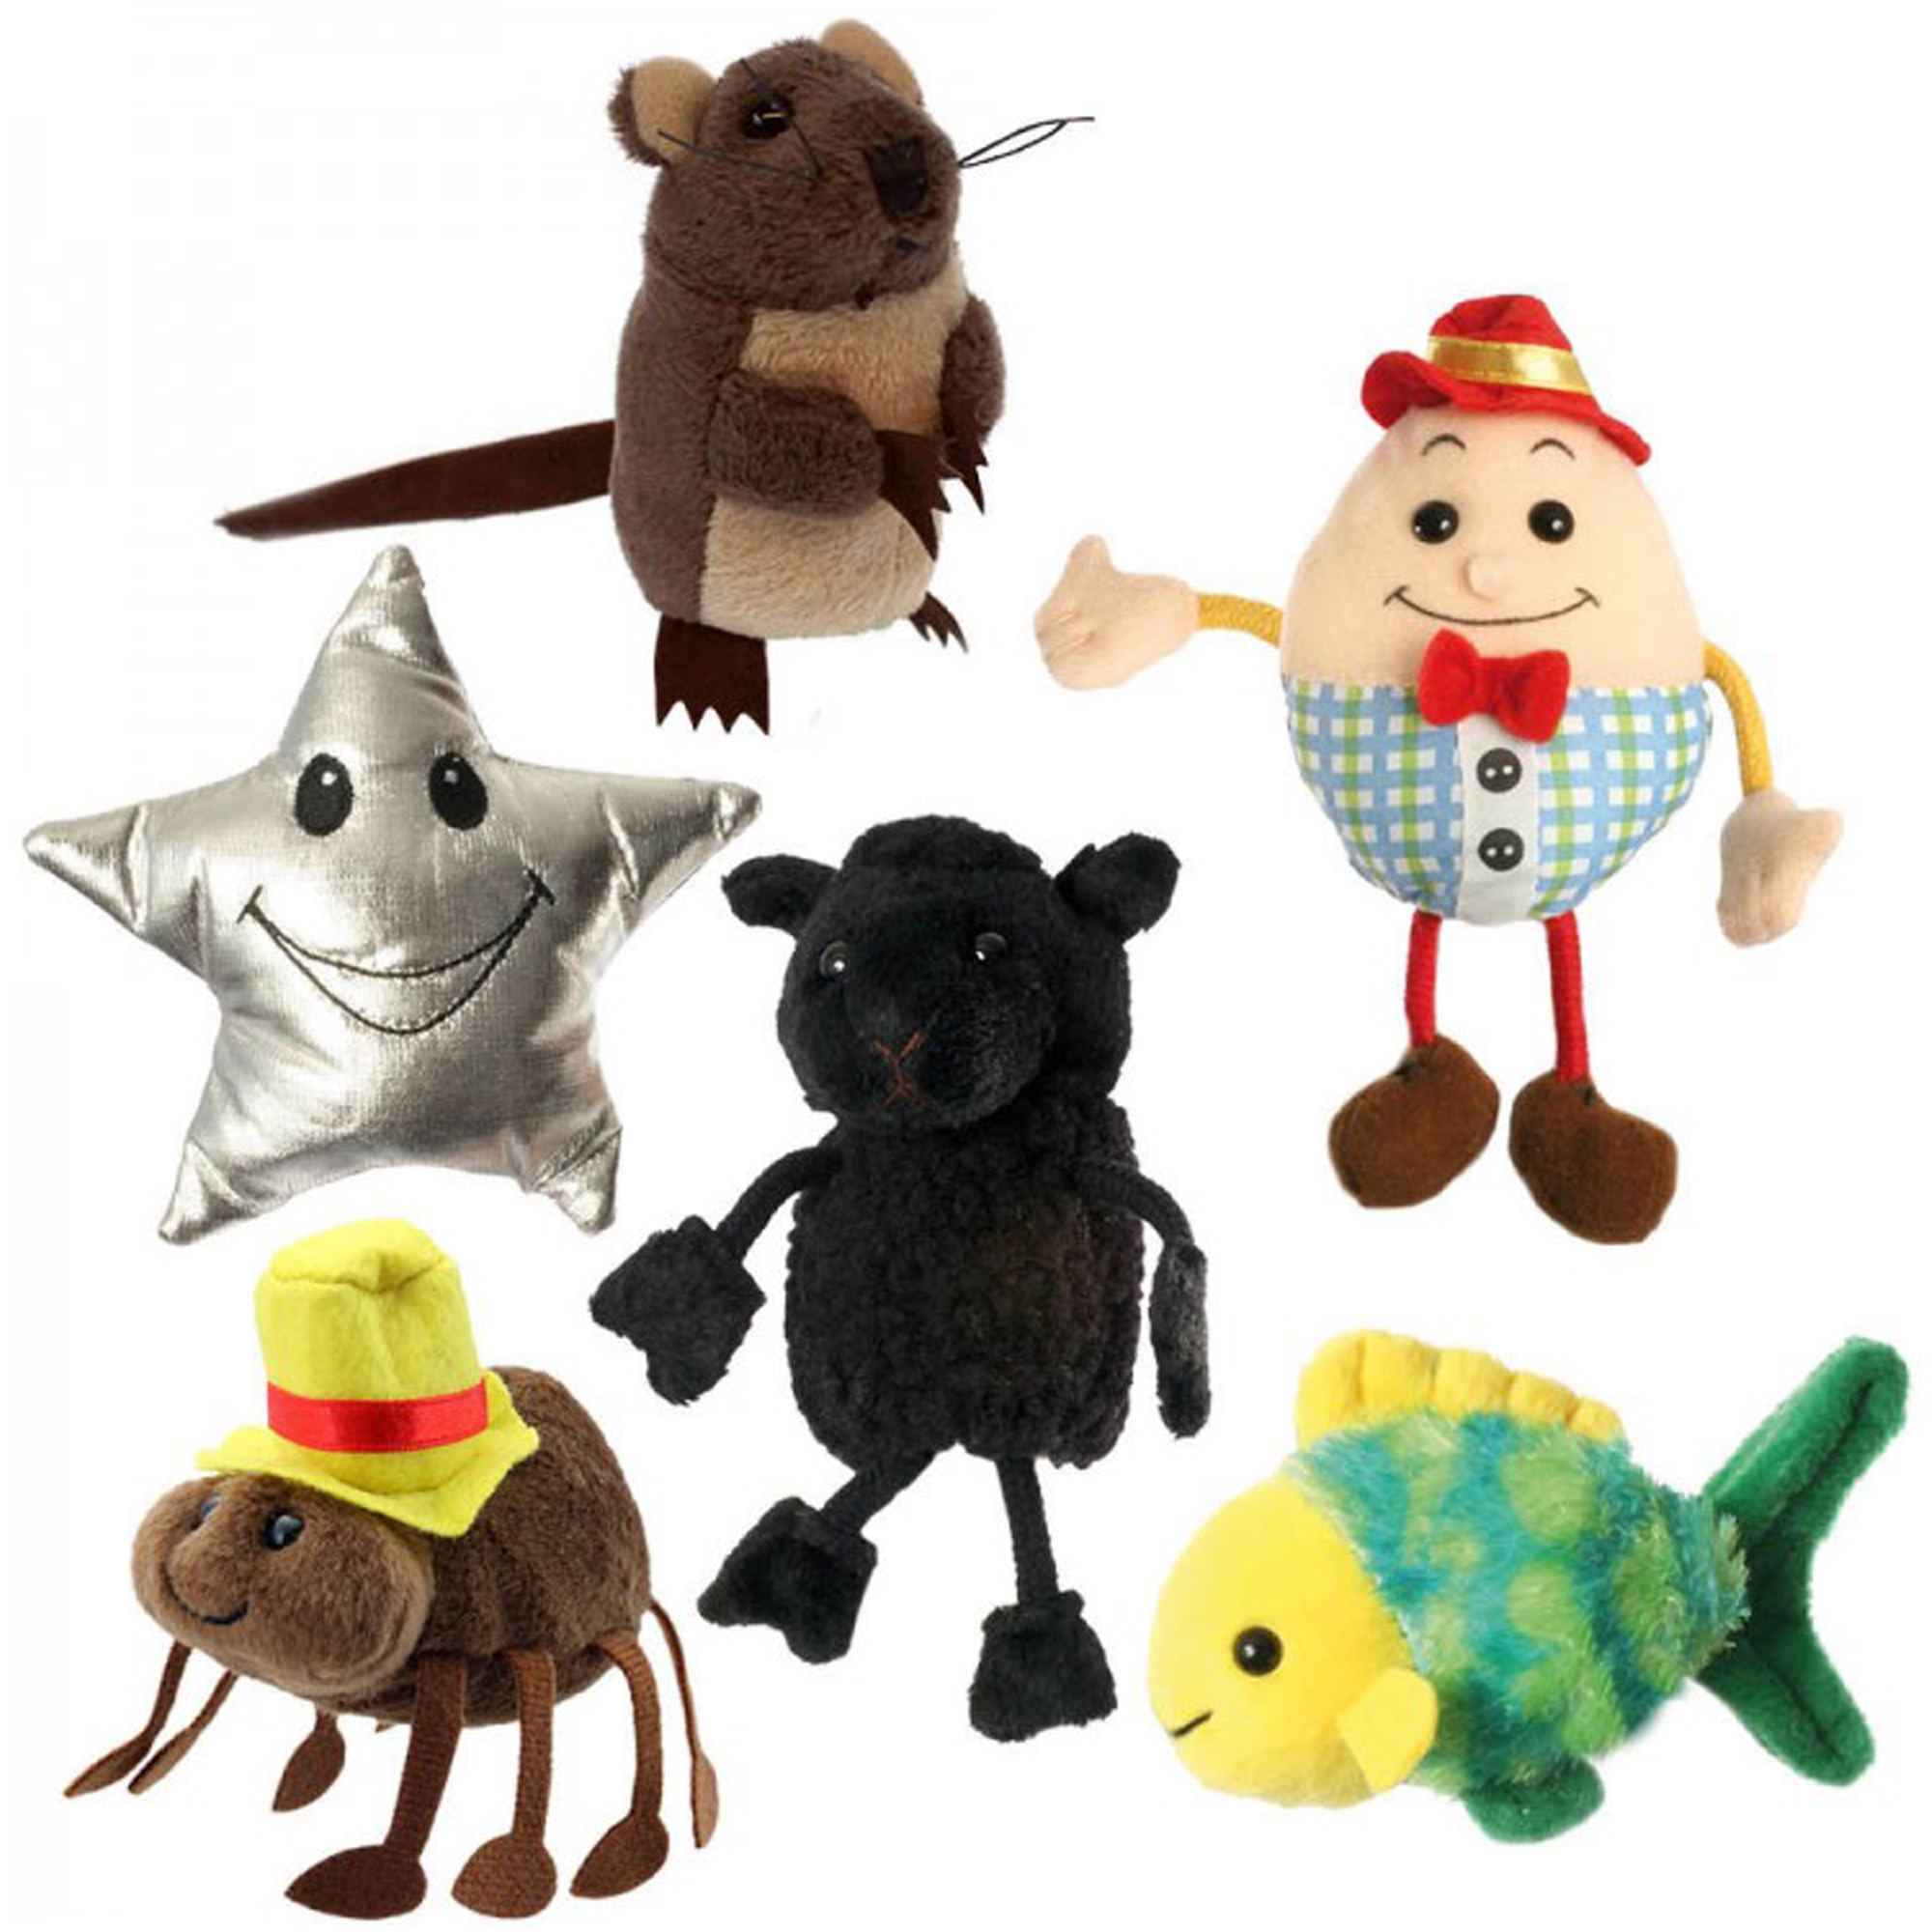 The Puppet Company Finger Puppets: Nursery Rhymes, Set of 6